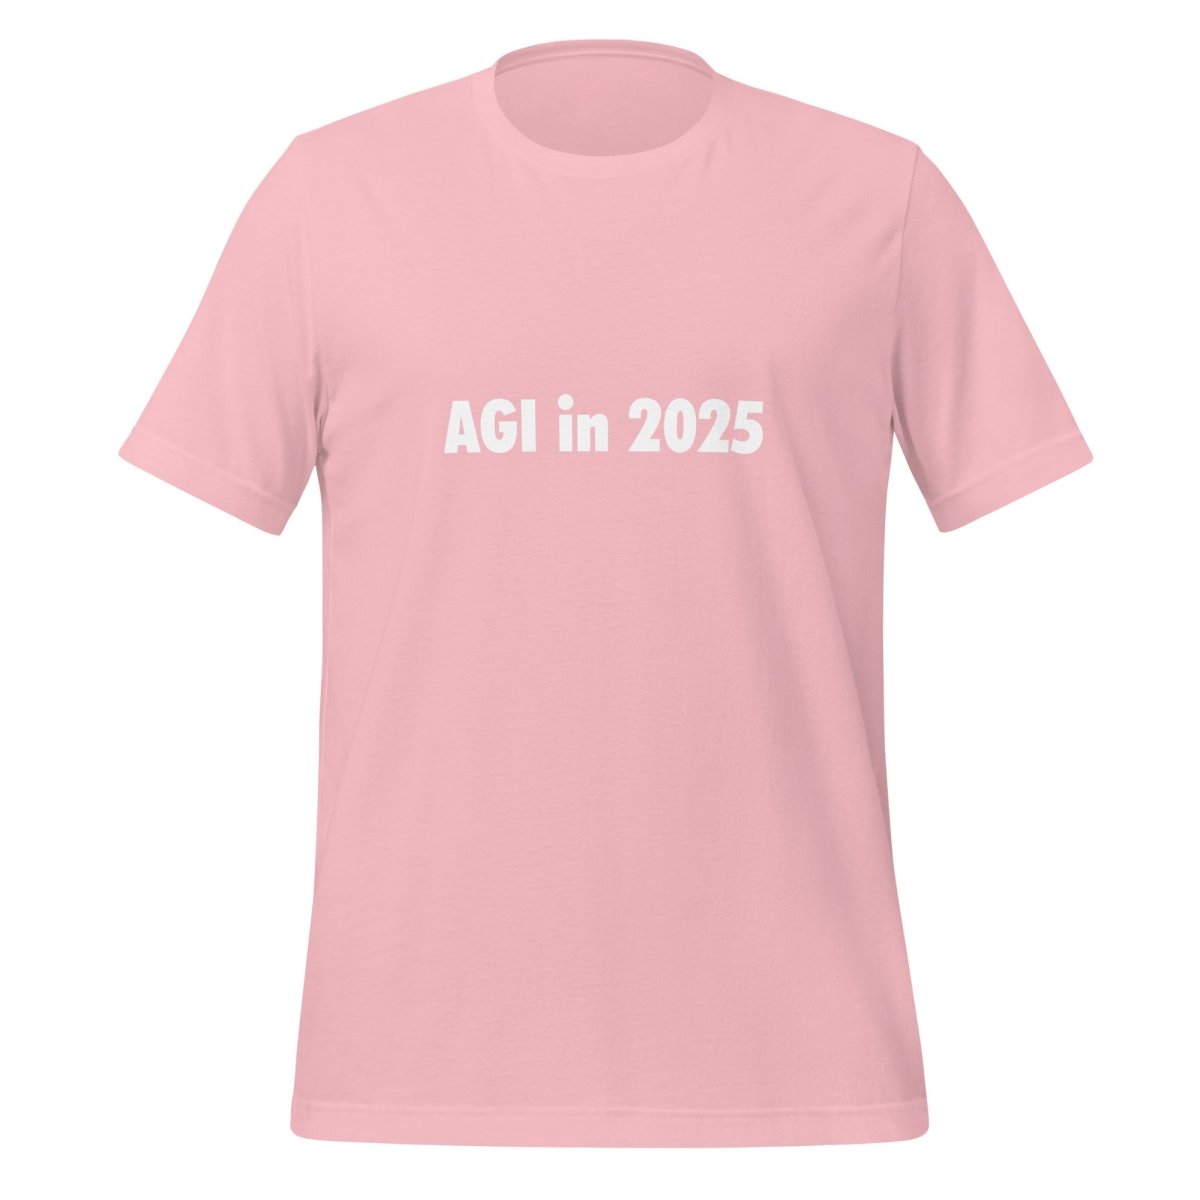 AGI in 2025 T - Shirt (unisex) - Pink - AI Store